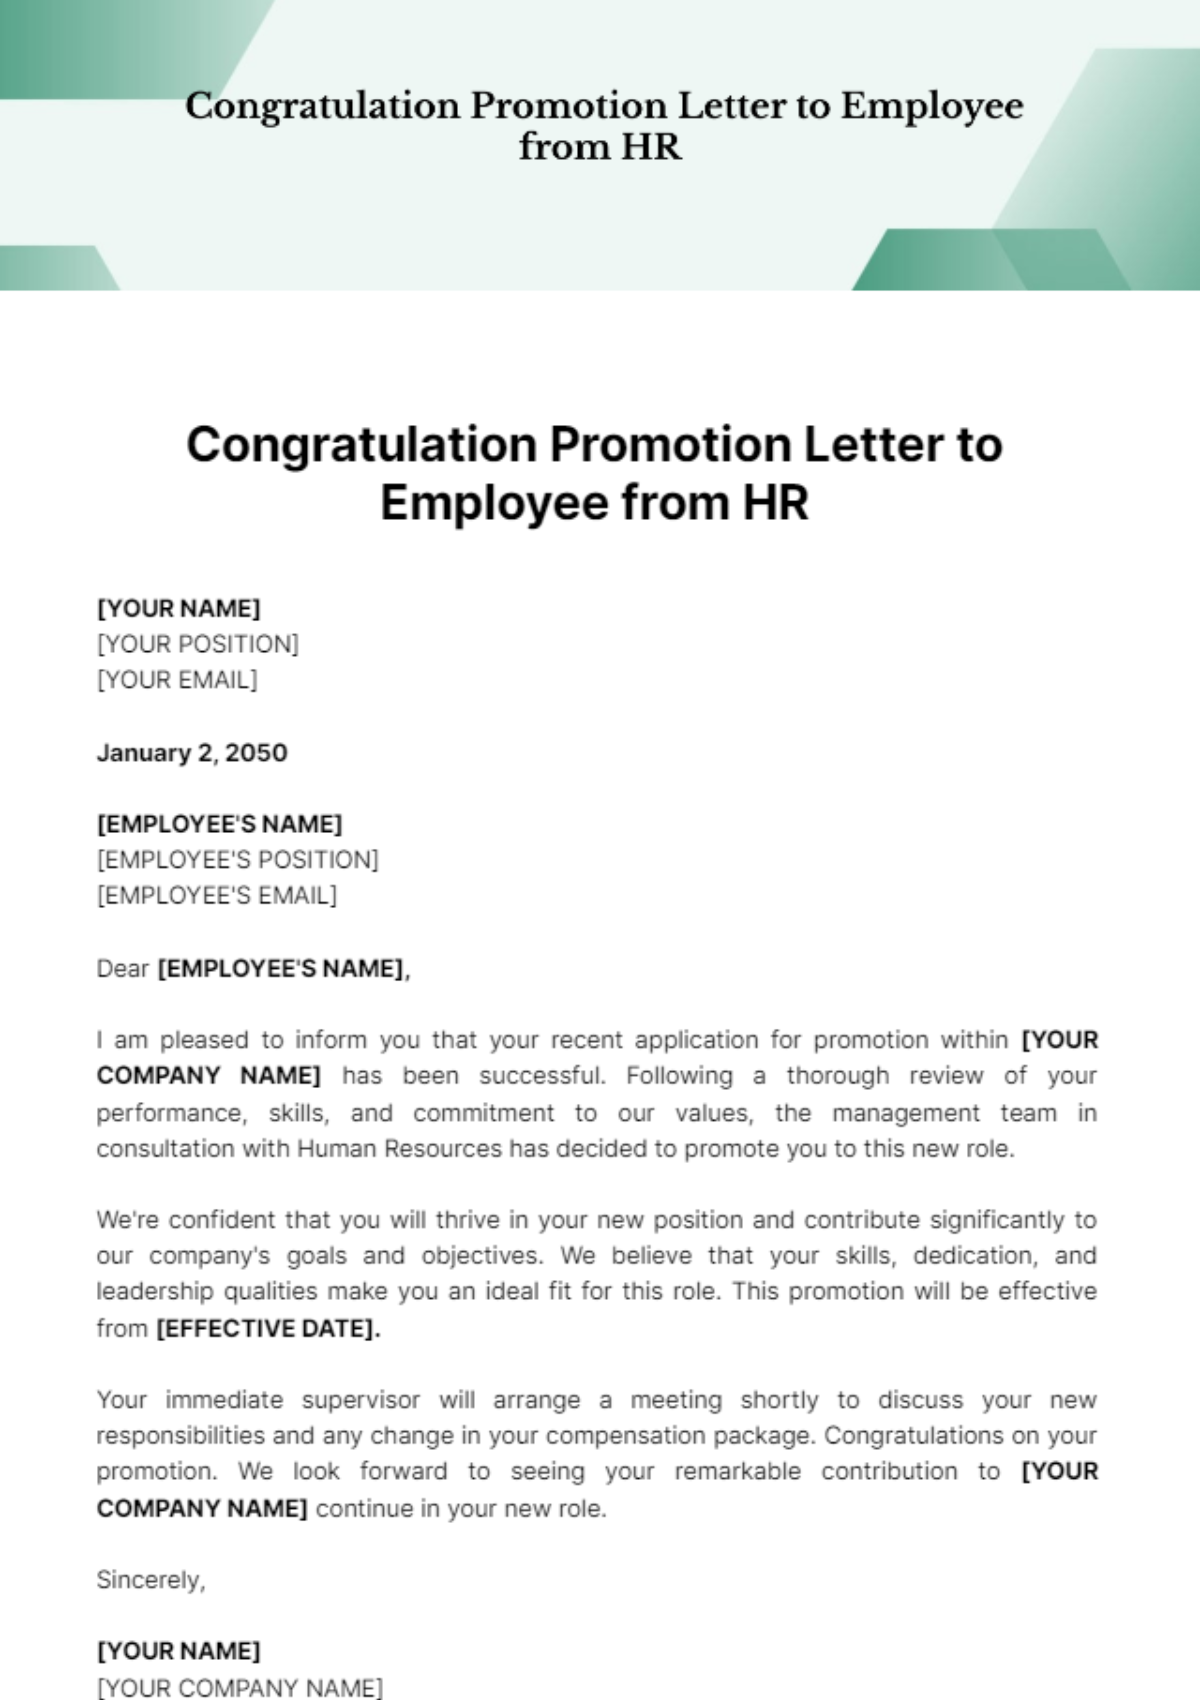 Free Congratulation Promotion Letter to Employee from HR Template